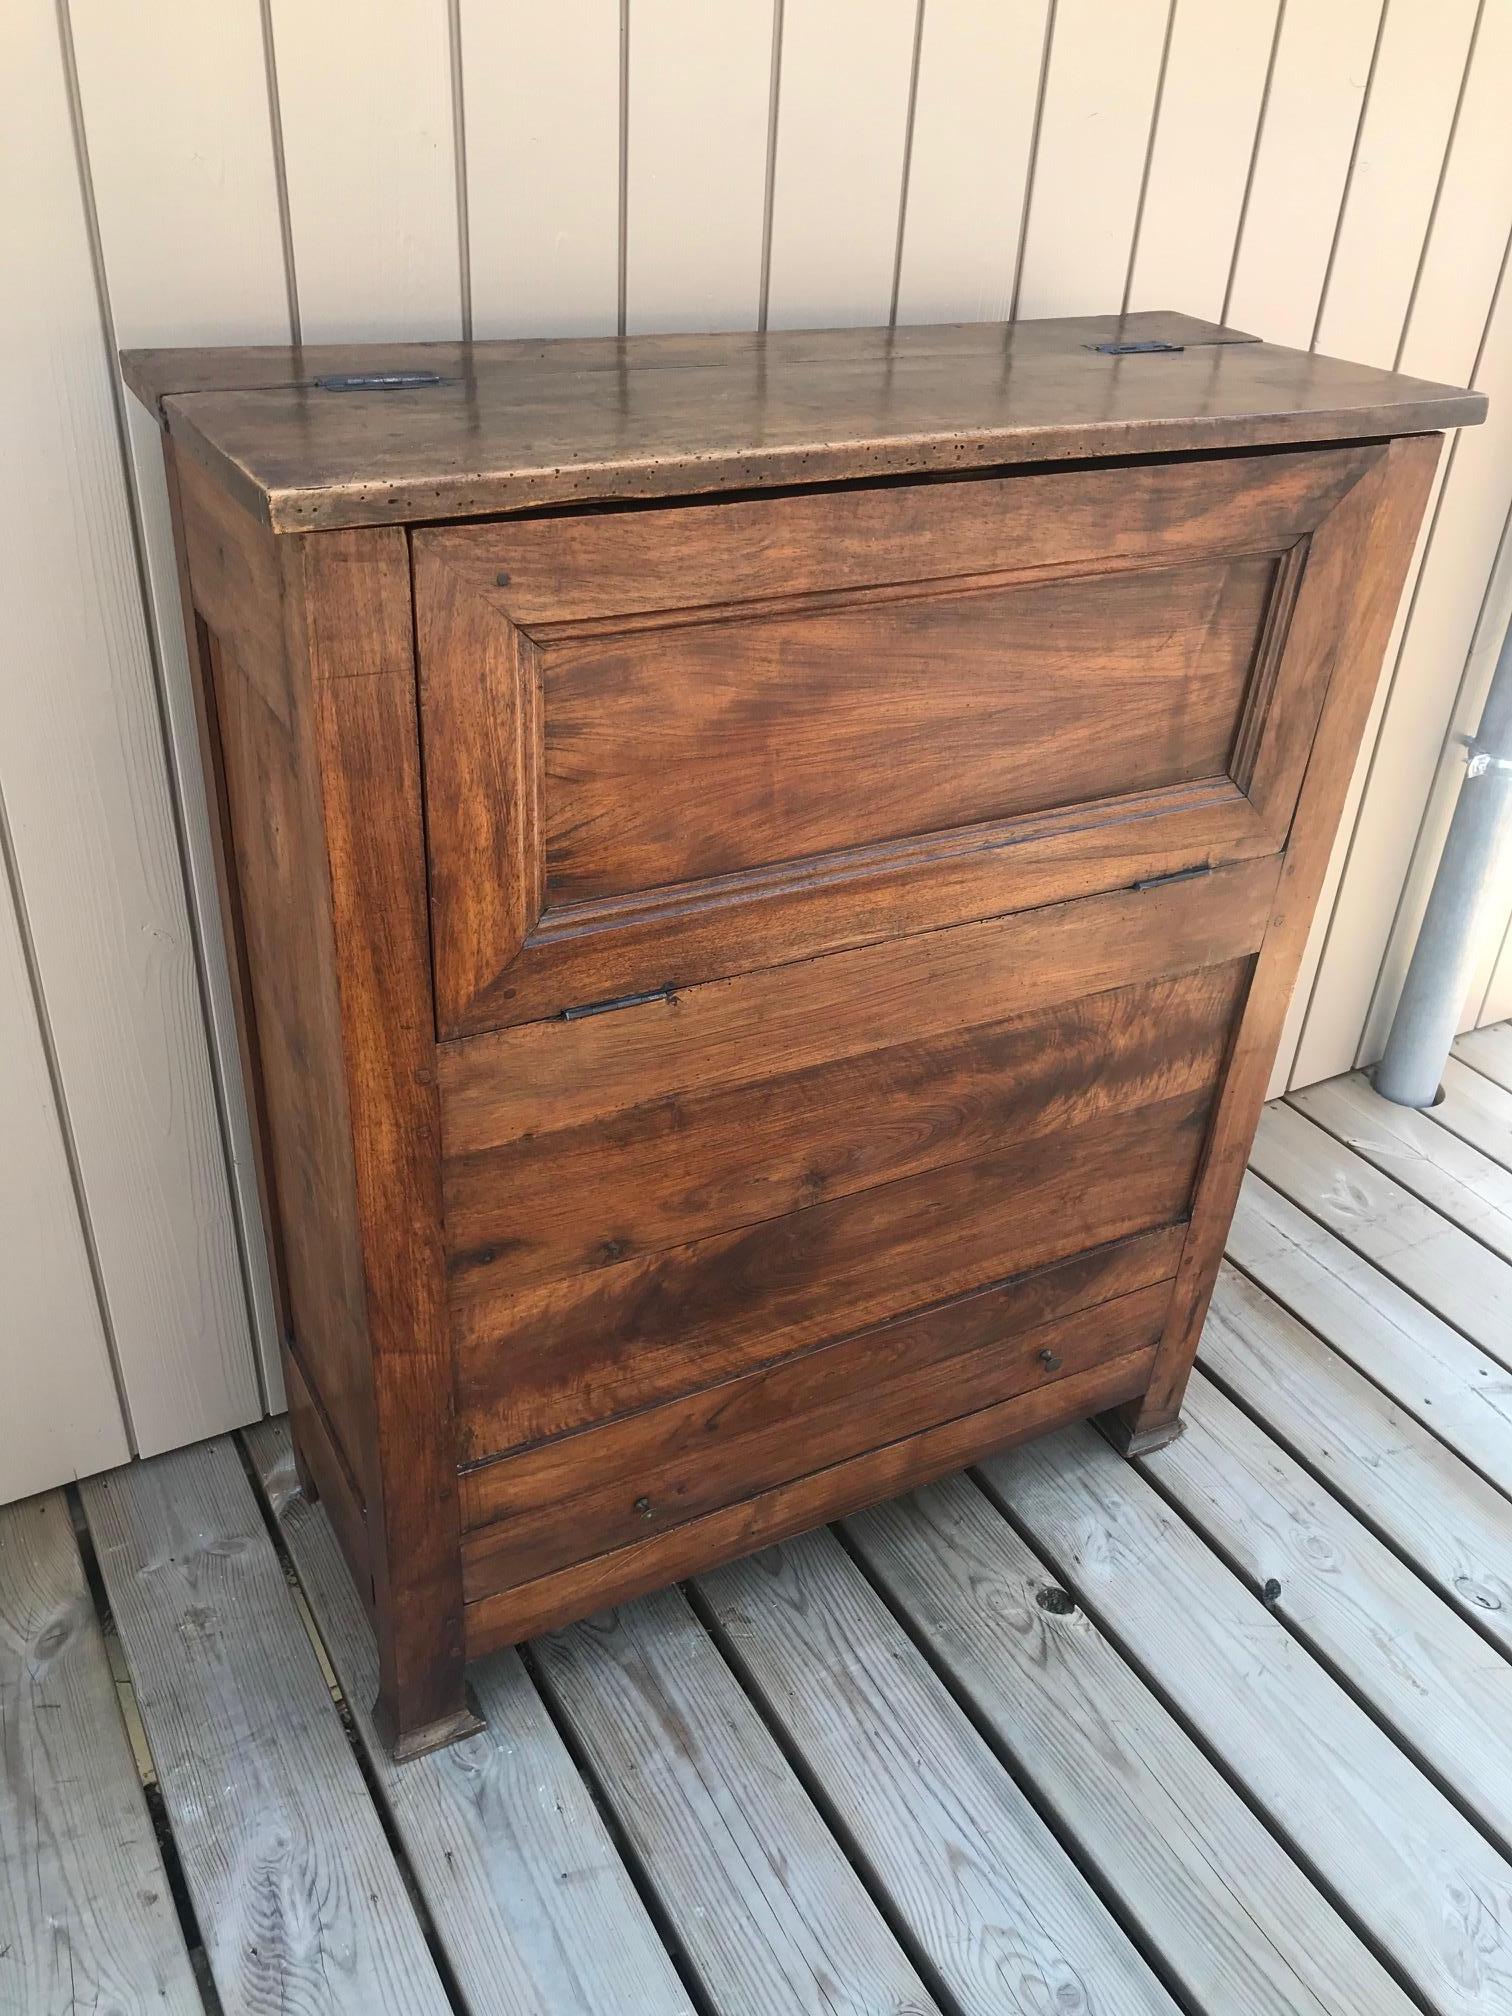 Very nice and original 18th century French walnut bread pannetiere or bread cupboard.
Opening on the top and in front to put the bread in. 
A large drawer to collect the bread crumbs. 
There is a rack on the inside bottom to put the bread on.